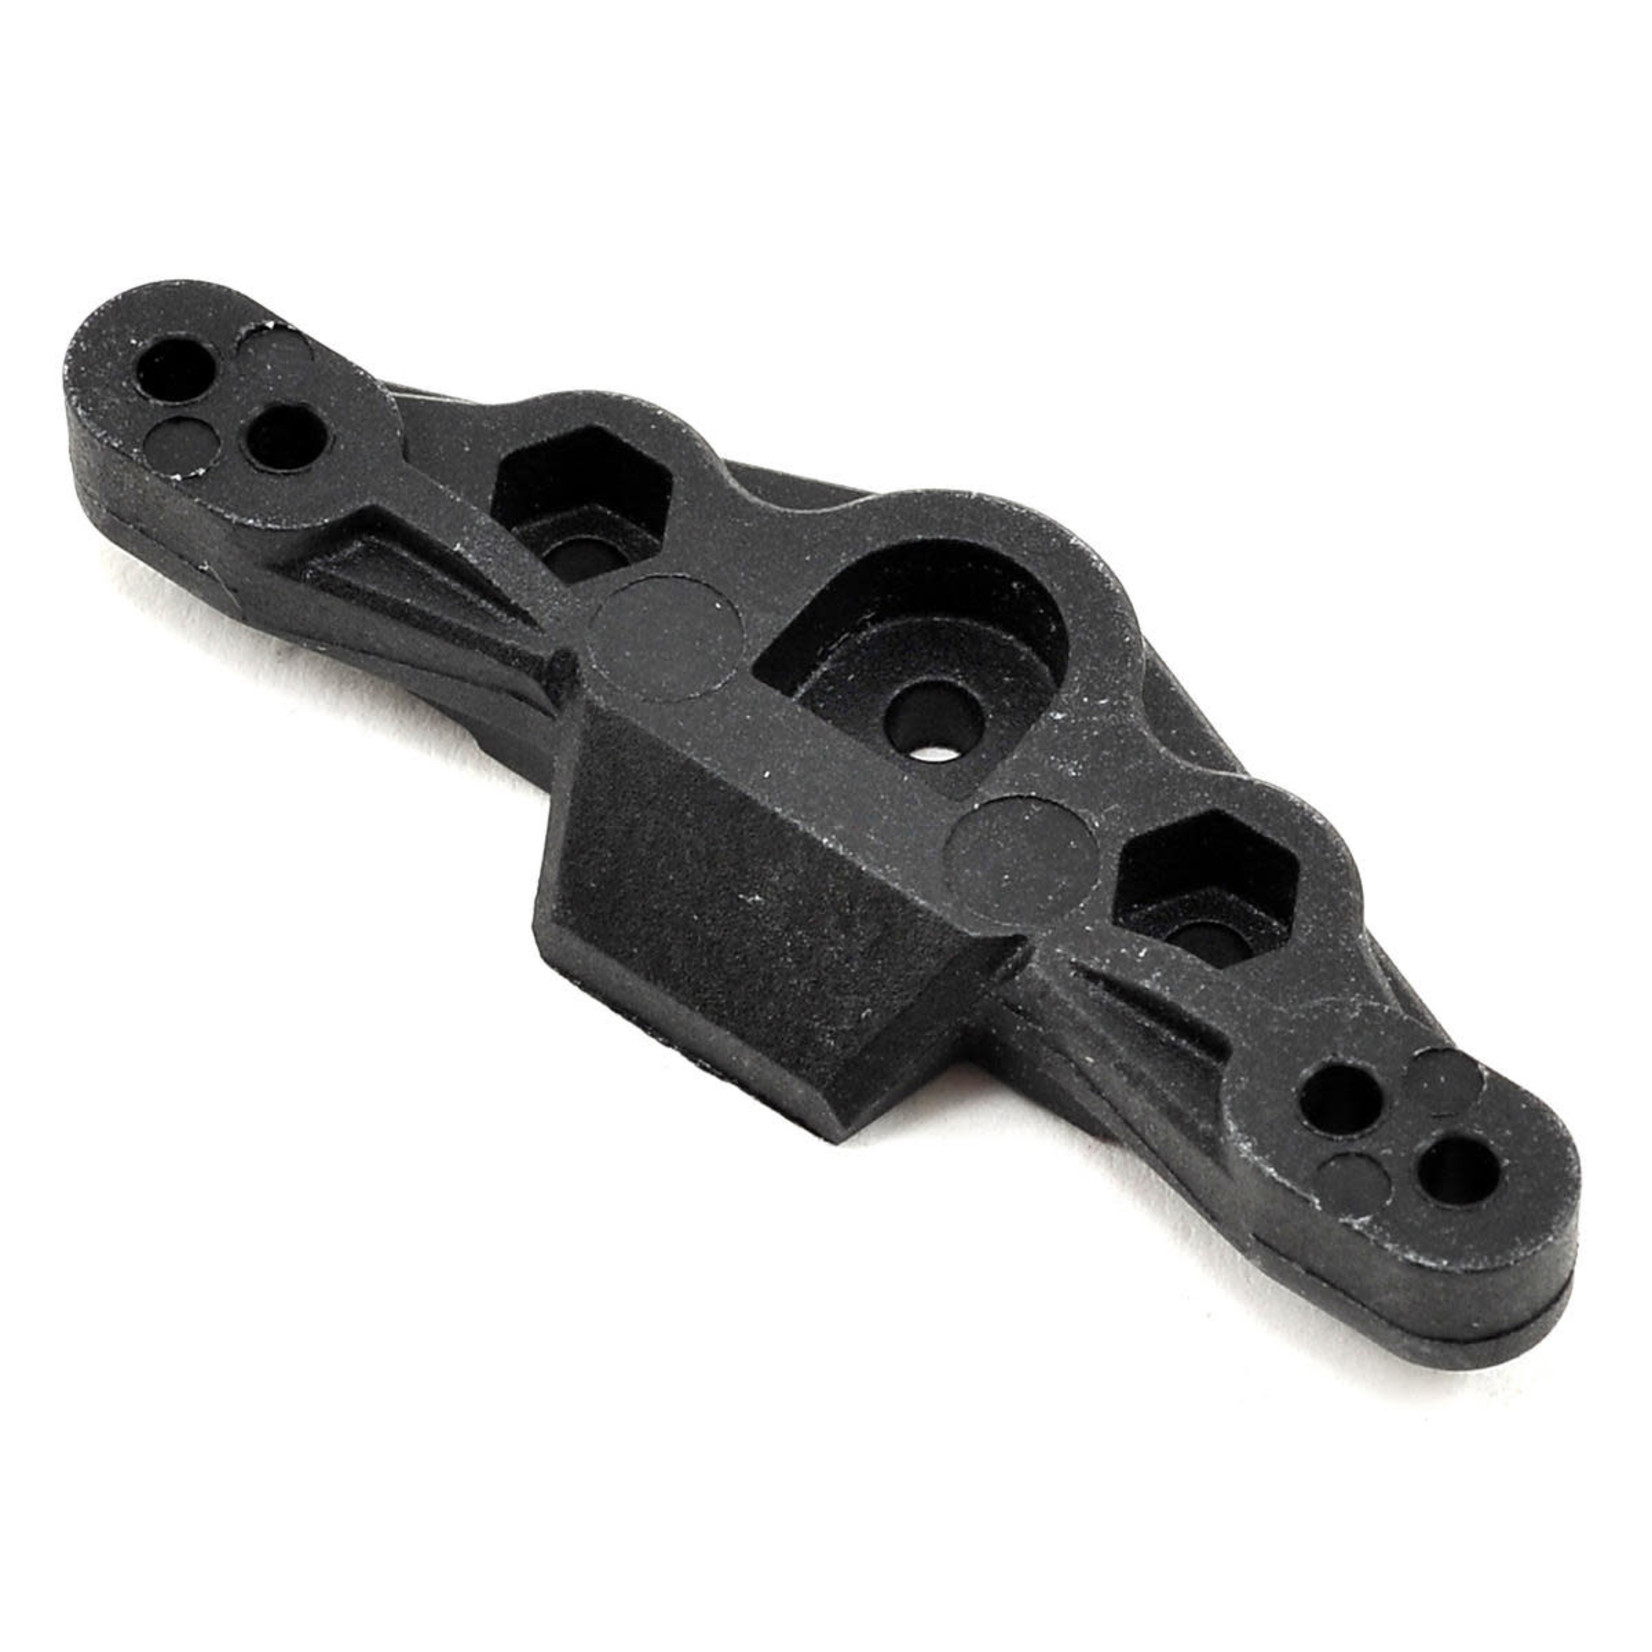 TLR Team Losi Racing 22 3.0 Front Camber Block #TLR234050